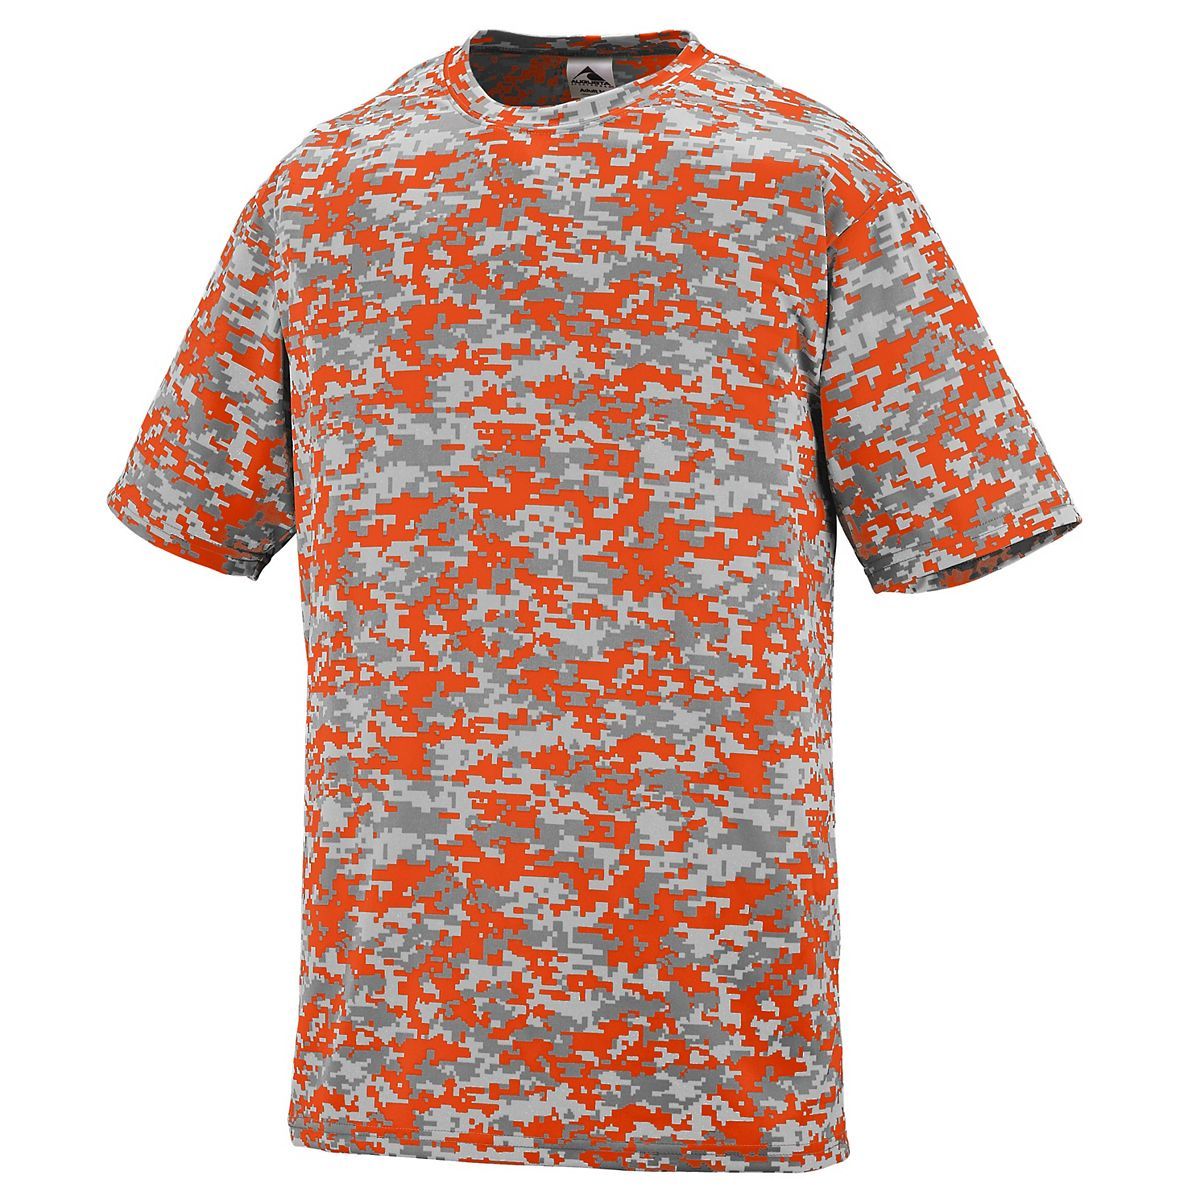 Augusta Sportswear Youth Digi Camo Wicking T-Shirt in Orange Digi  -Part of the Youth, Youth-Tee-Shirt, T-Shirts, Augusta-Products, Shirts product lines at KanaleyCreations.com